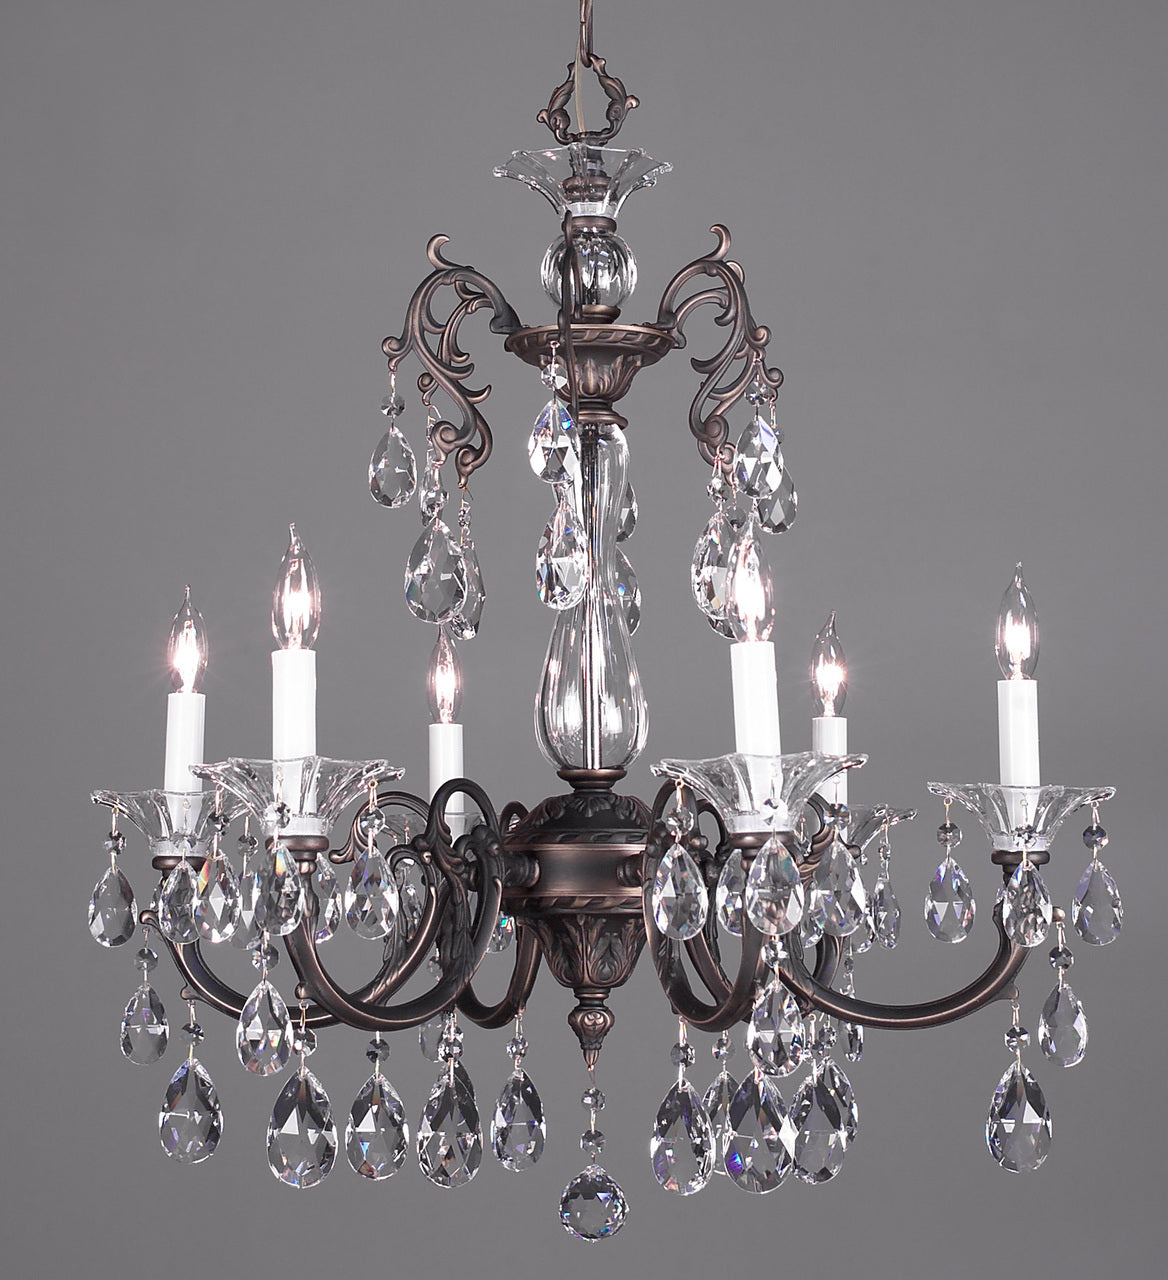 Classic Lighting 57056 RB CGT Via Lombardi Crystal Chandelier in Roman Bronze (Imported from Spain)